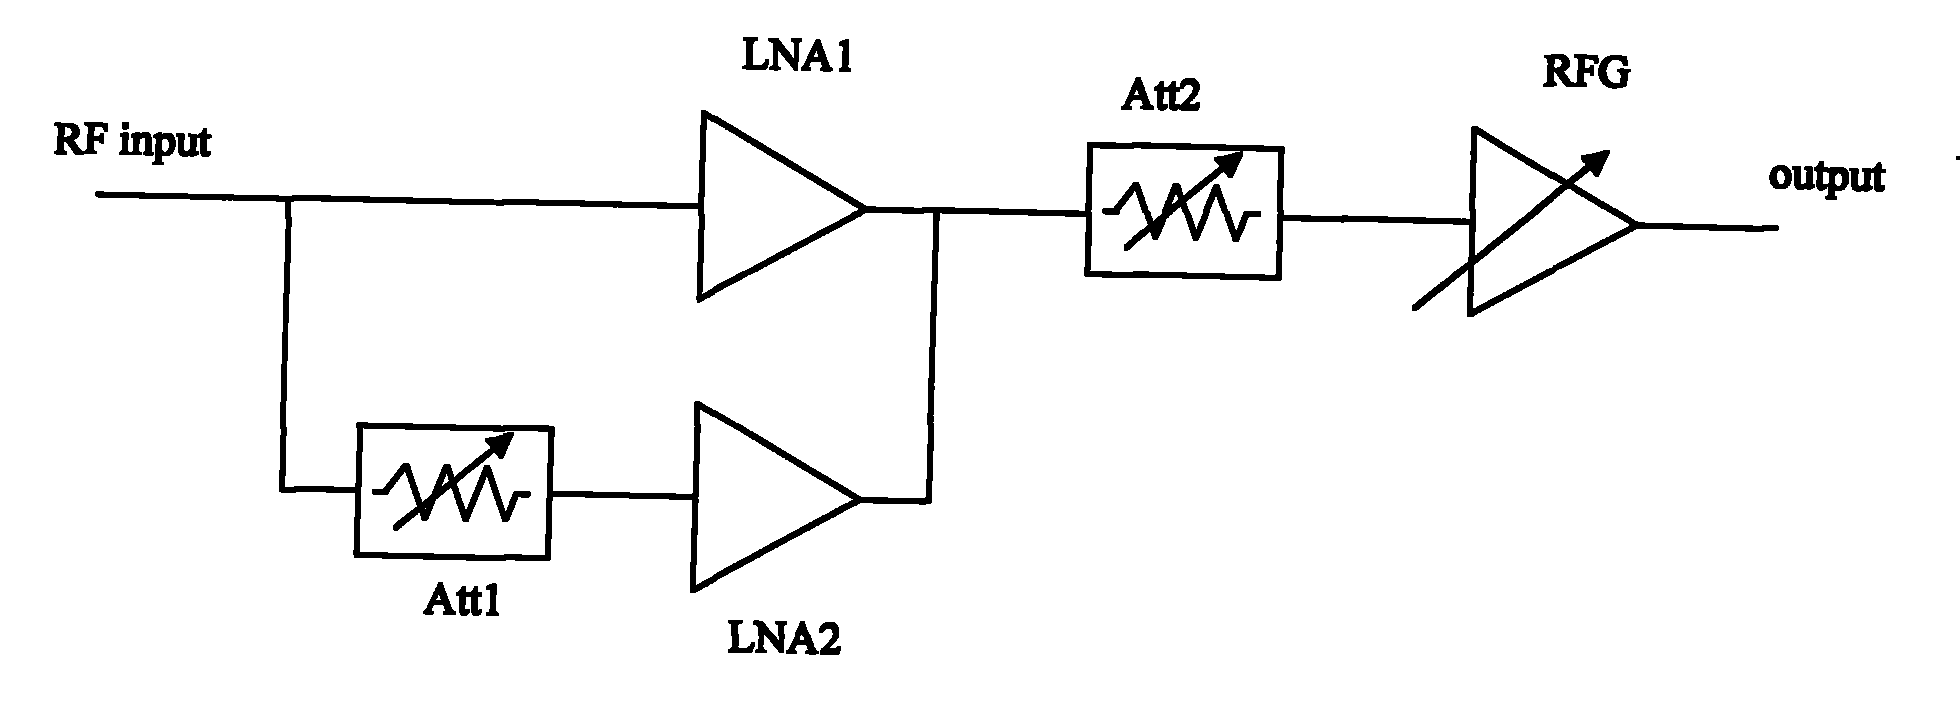 Method for controlling gain and attenuation of broadband low-noise amplifier